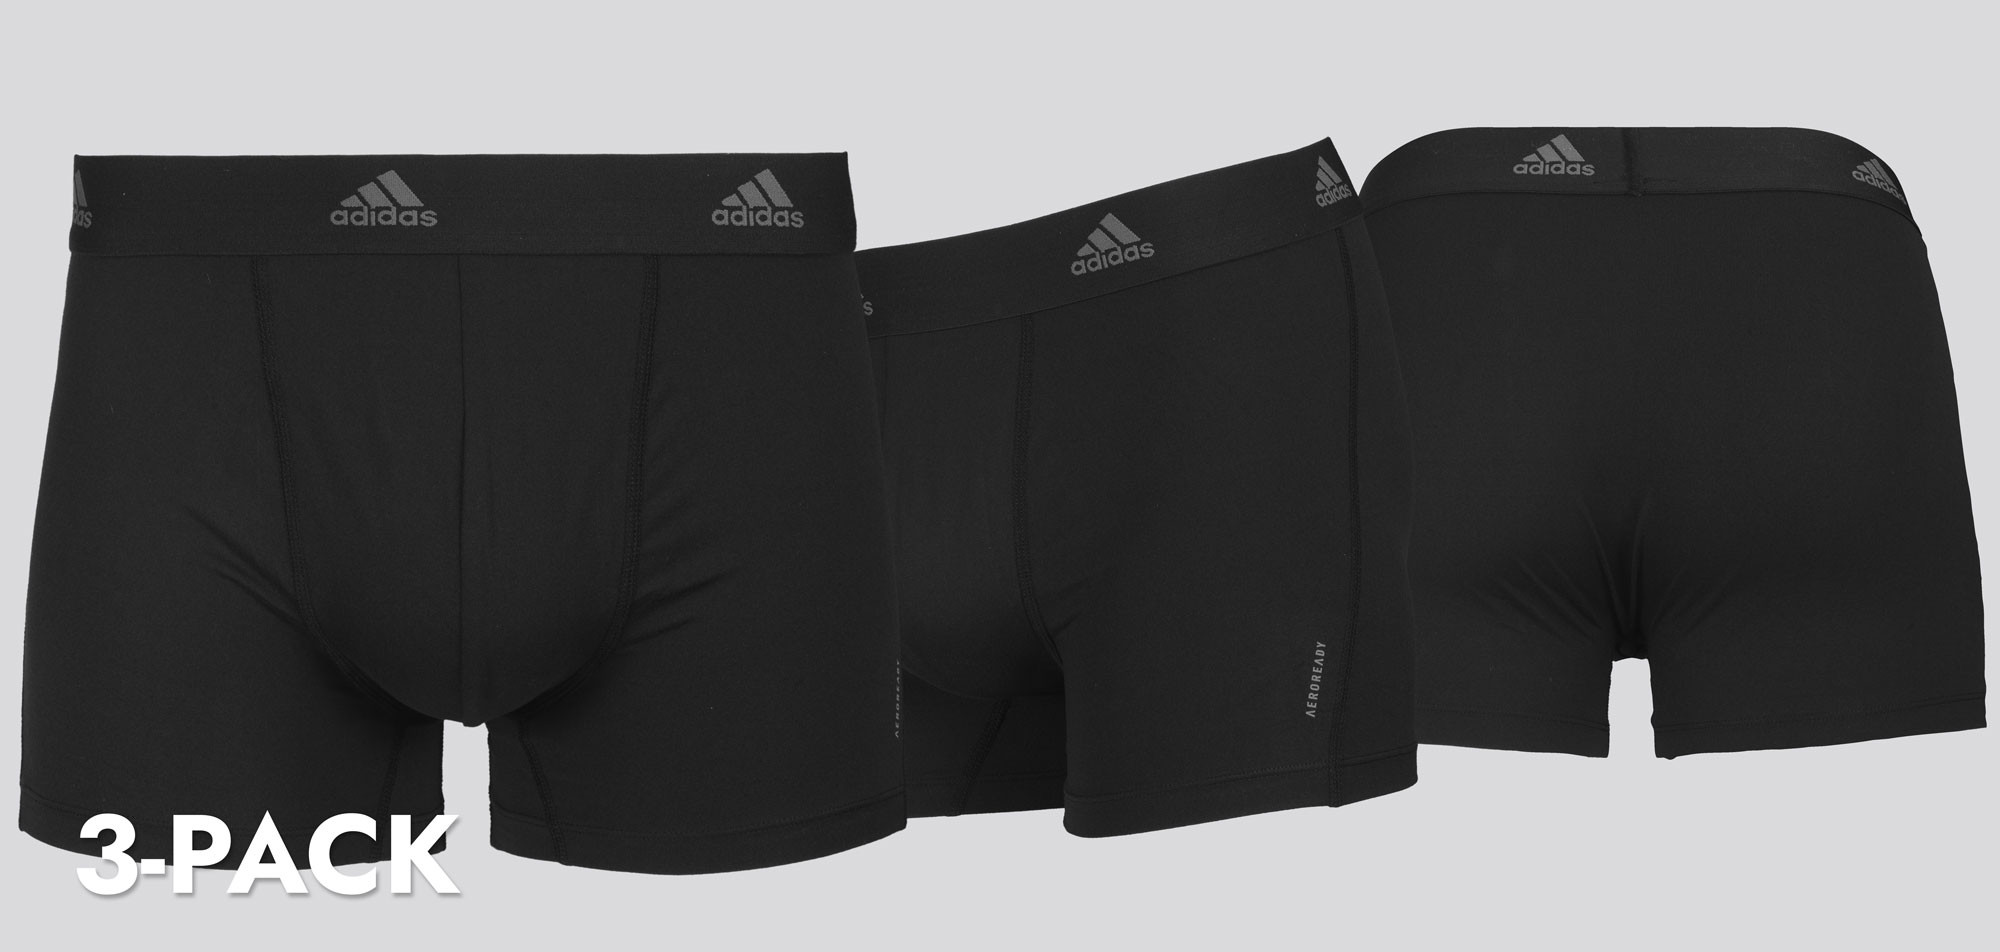 Adidas Trunk 3-Pack 4A3M02 Active Micro Flex Eco, color Nee